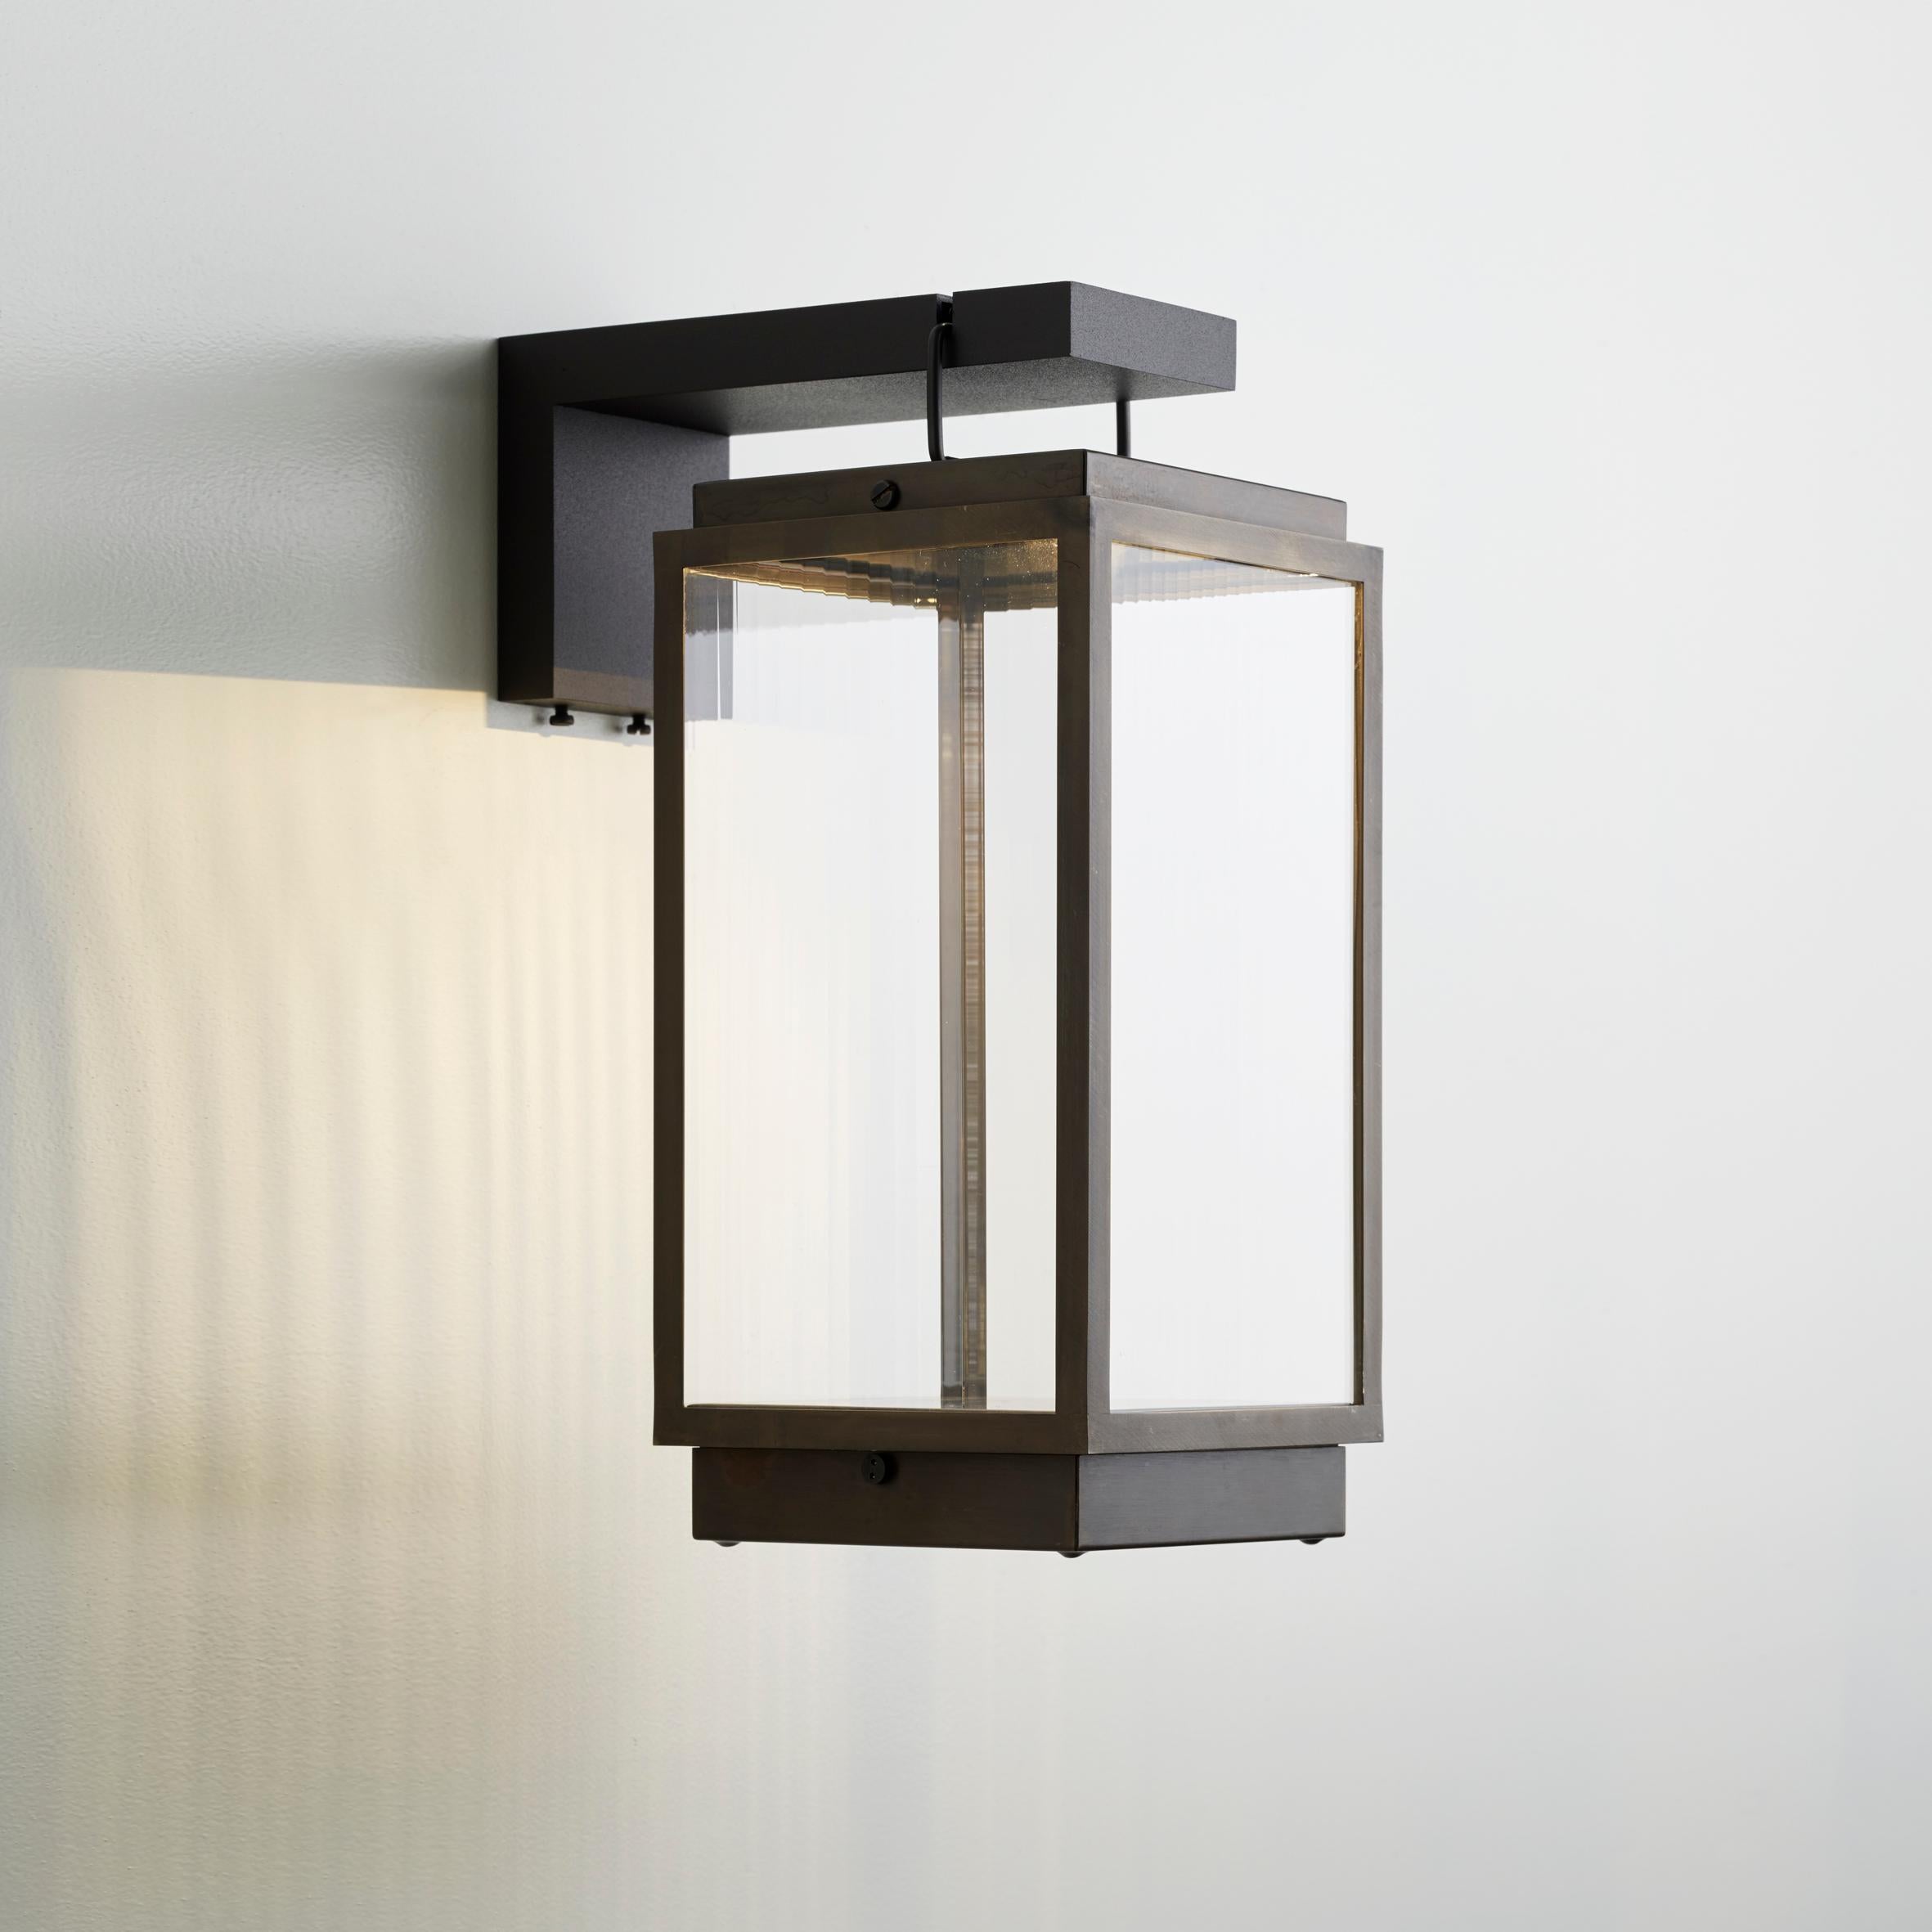 Eclectic table lamp in bronze lacquered with inside fitted glass. With bracket in aluminium, lacquered in bronze color. Supplied with rechargeable Li-ion battery at the bottom, good for a life span of seven hours after full recharge (of two hours).